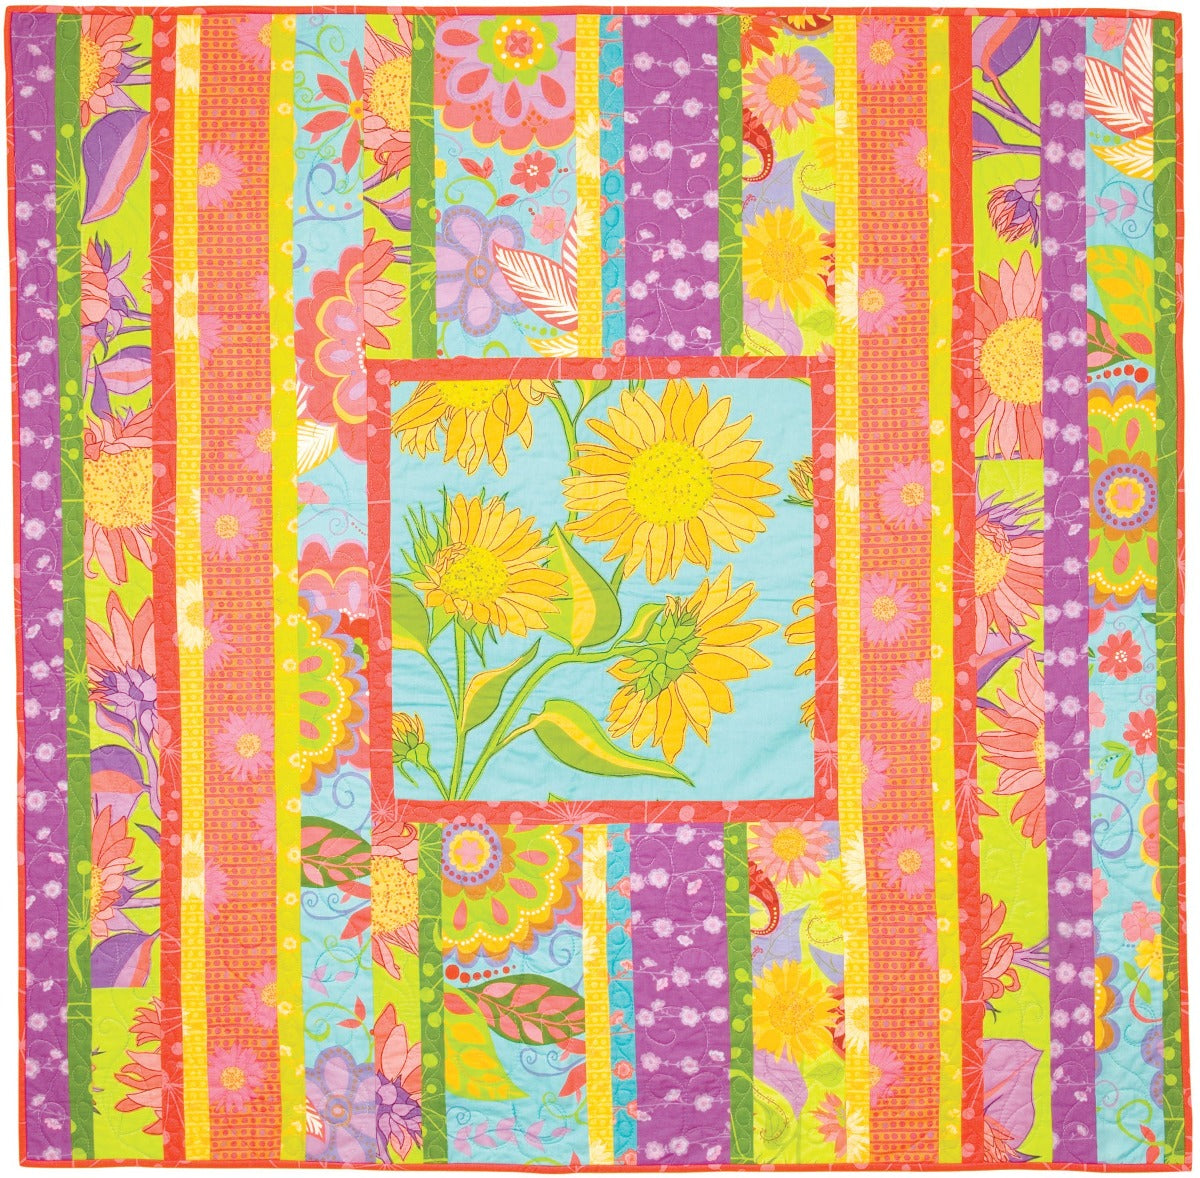 Sole Quilt - Free Downloadable Quilting Pattern by Valori Wells